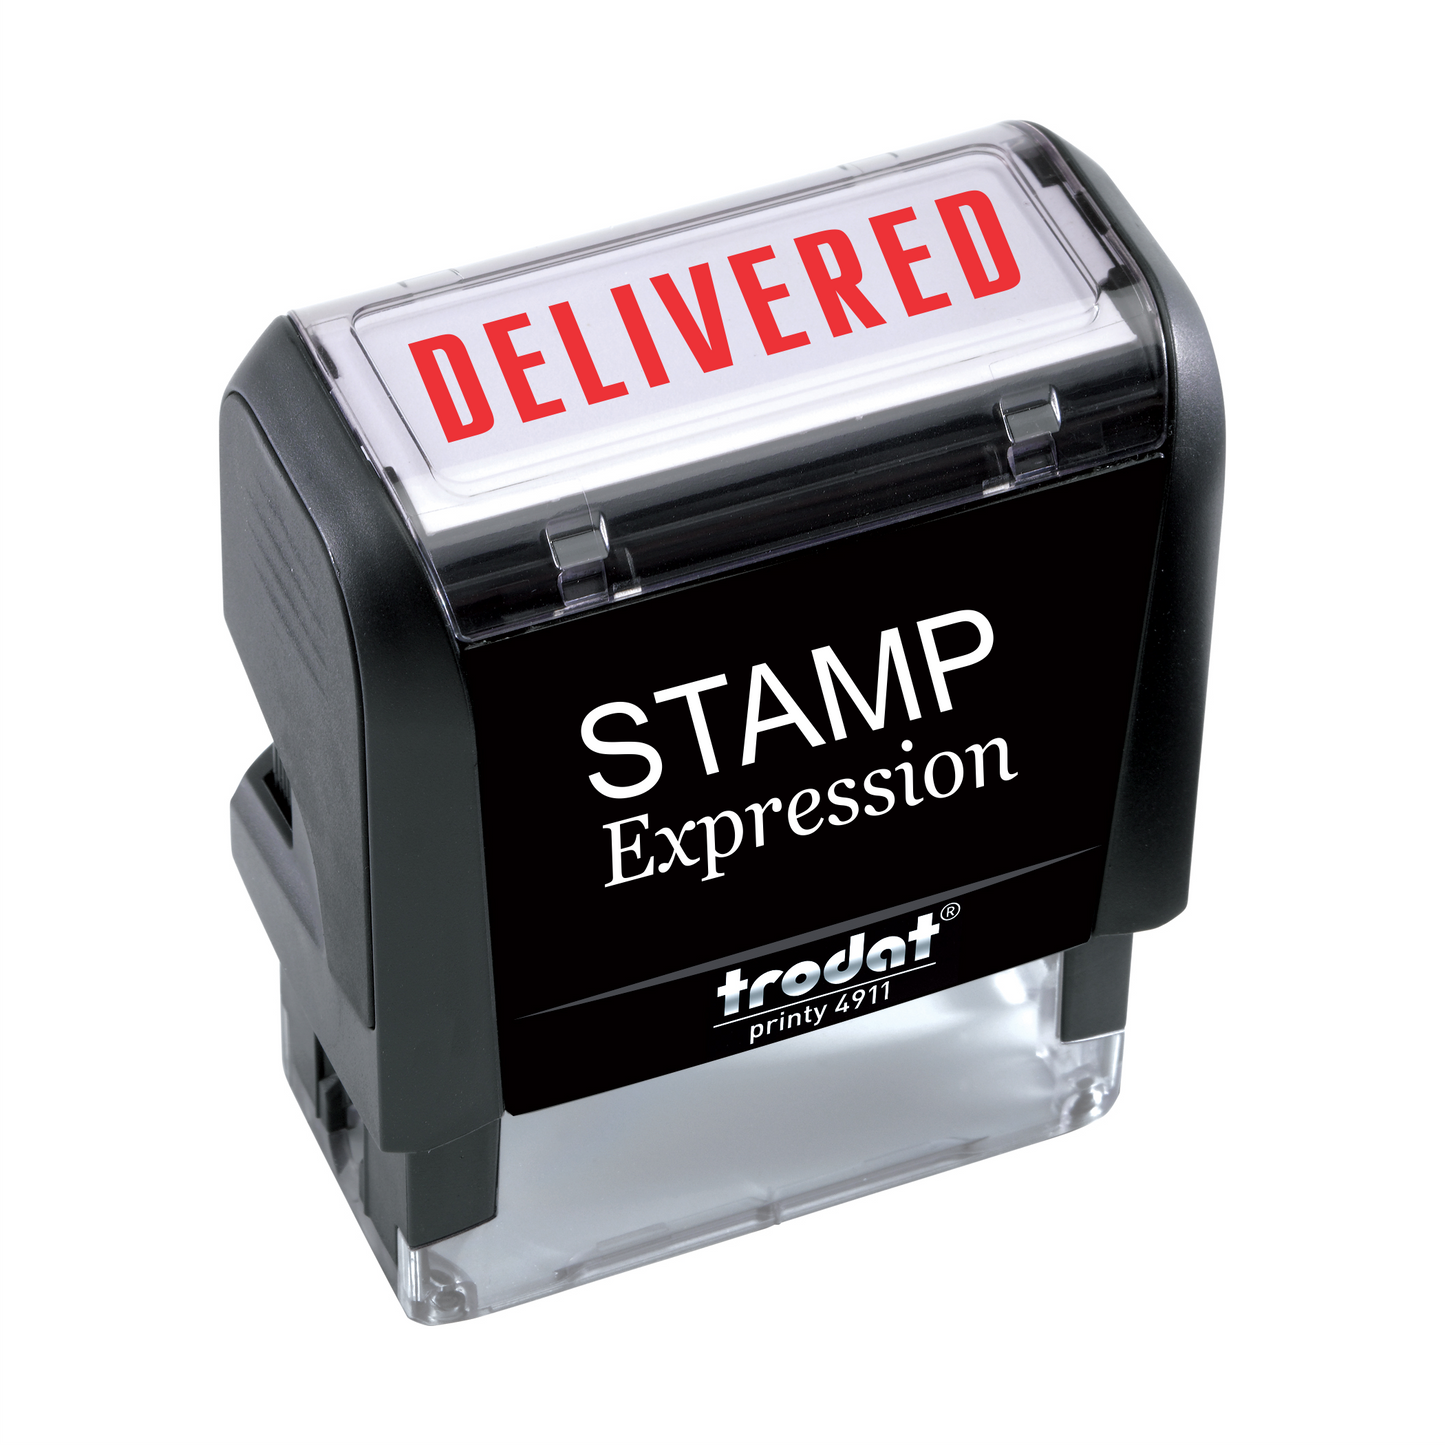 Delivered Office Self Inking Rubber Stamp (SH-5100)